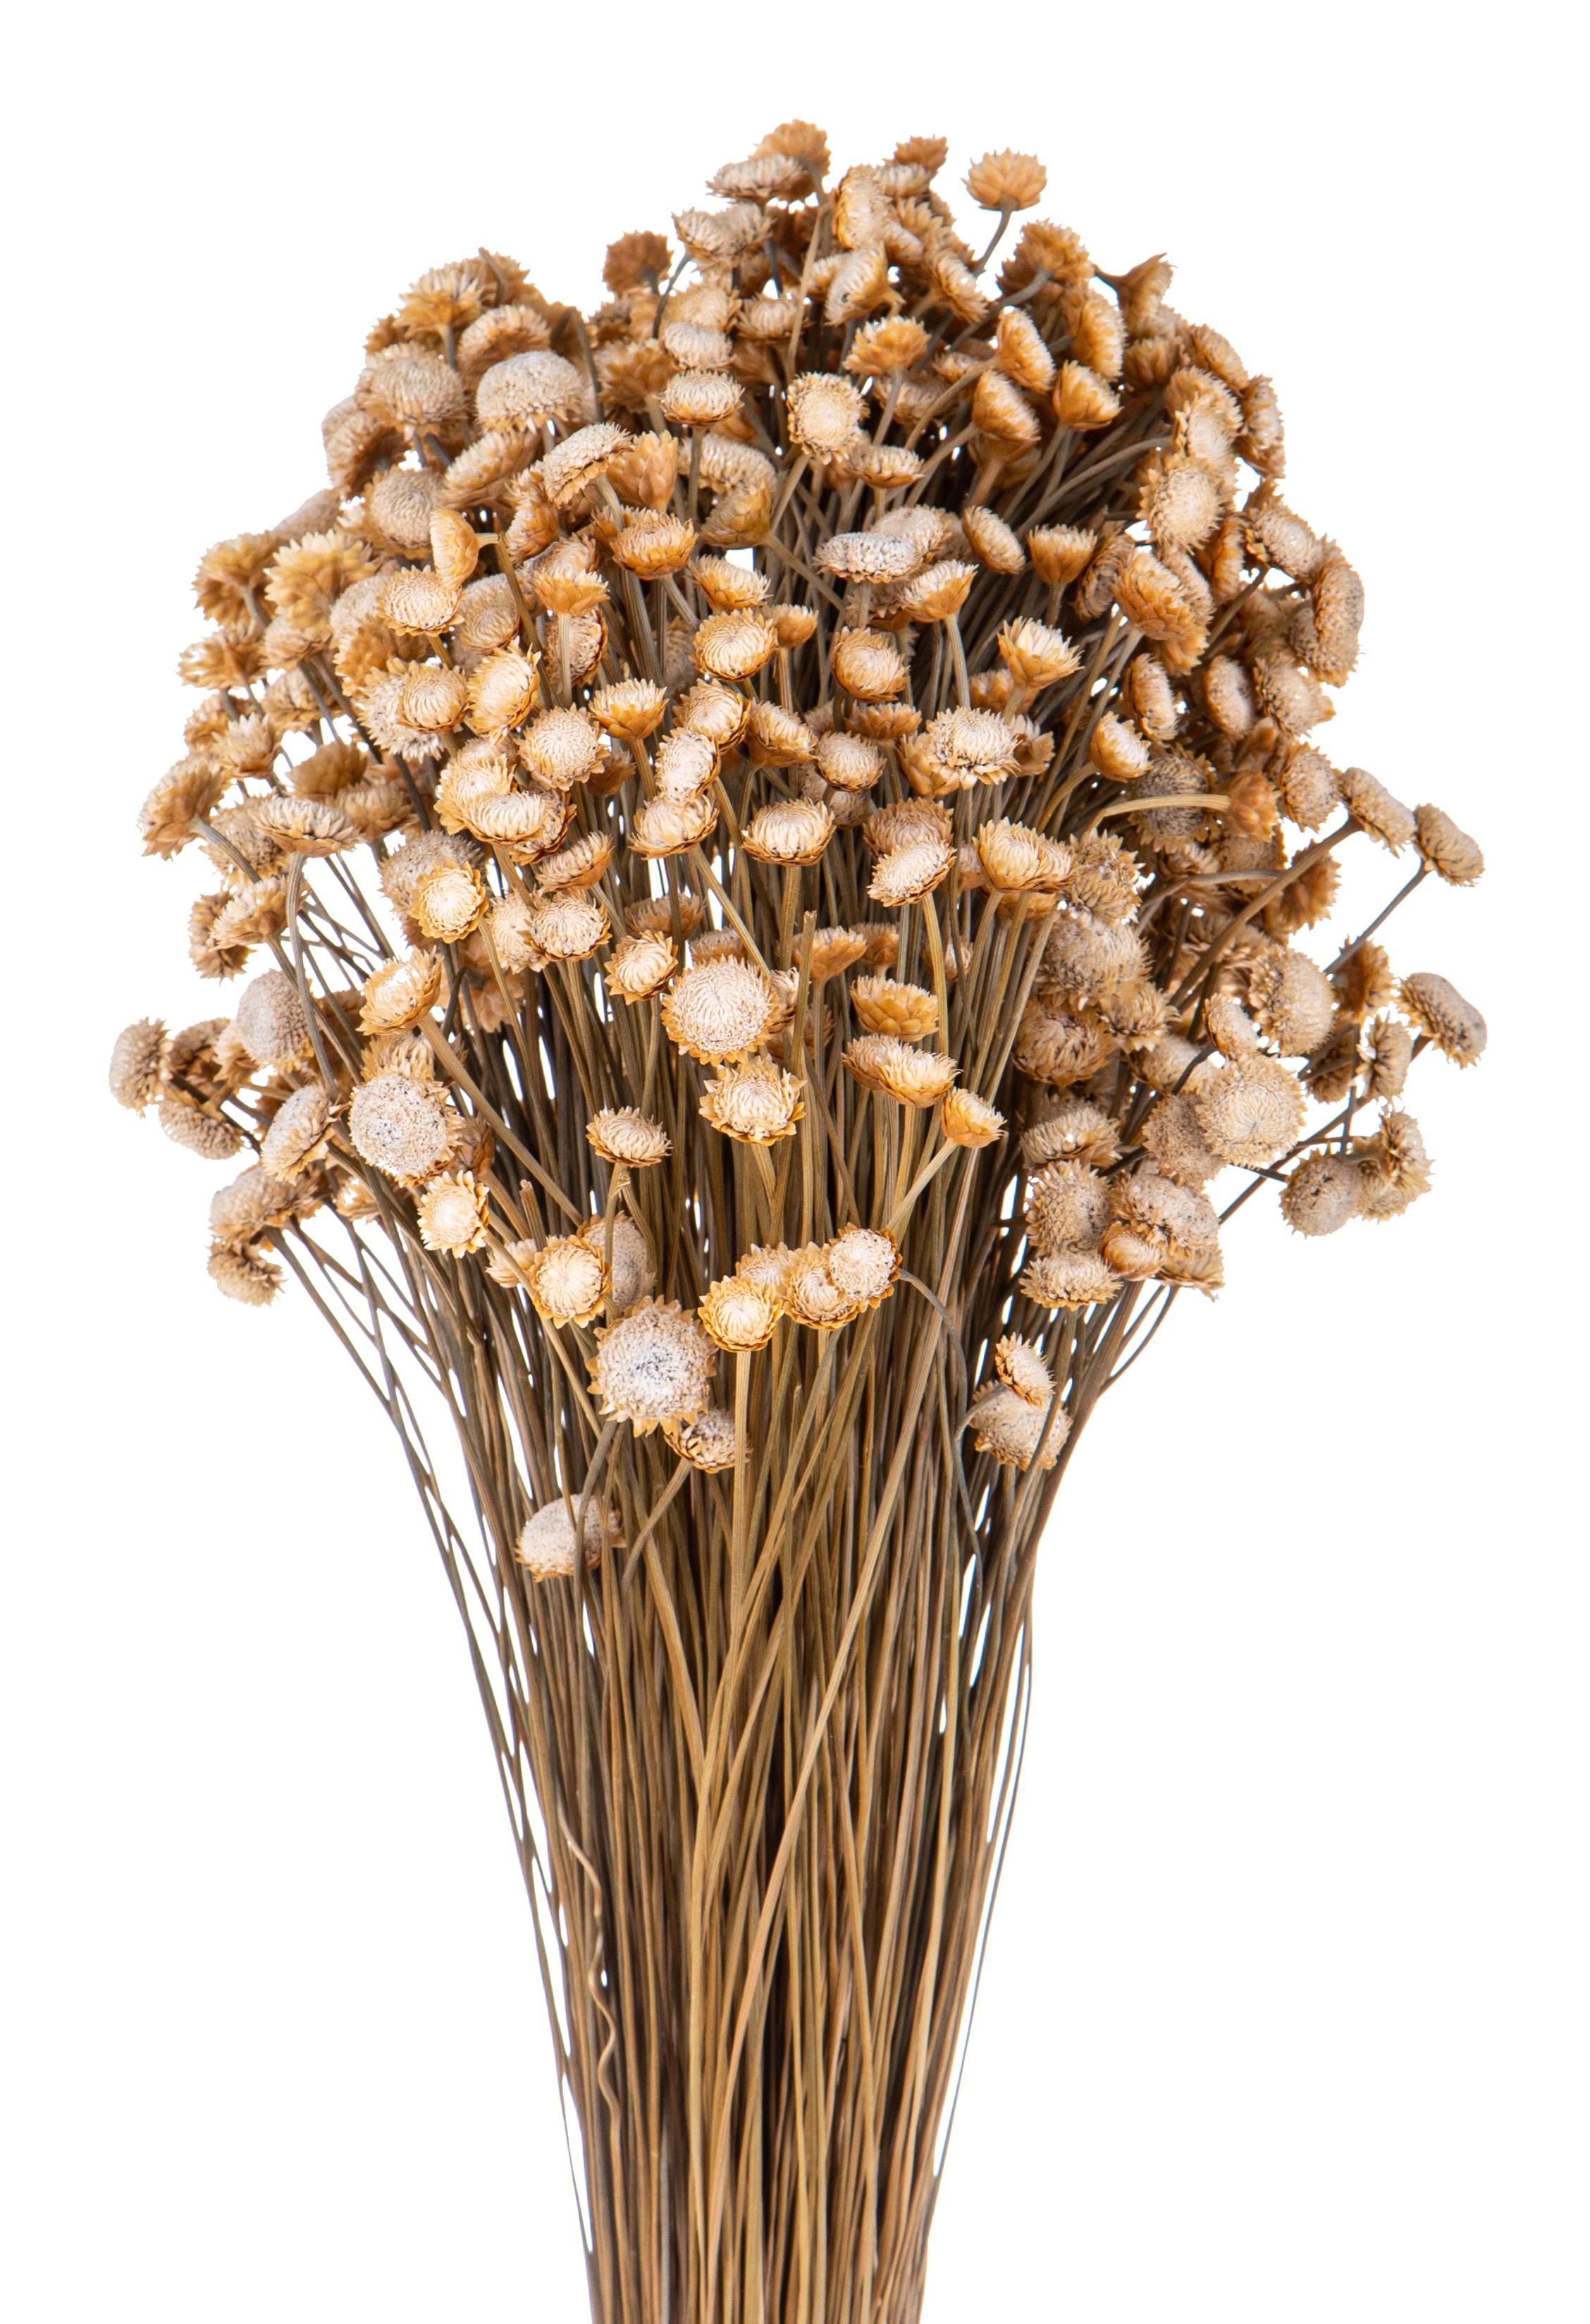 NATURAL PRODUCTS DRIED FLOWERS AND ERBS, NATURAL GRASS, BOTTONE DOURADO MAZZO NAT.